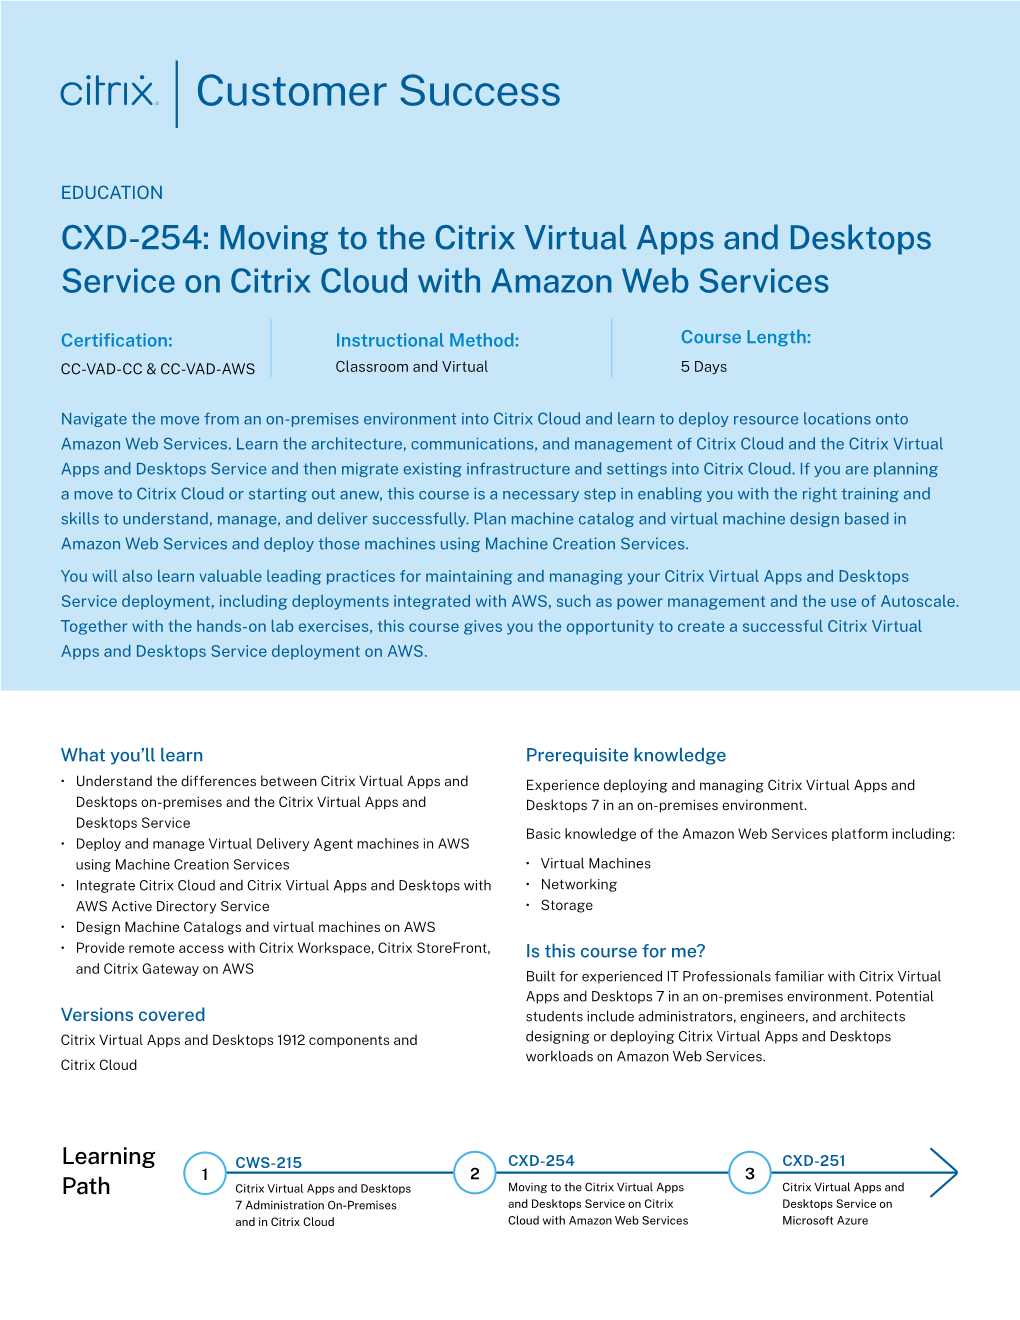 CXD-254: Moving to the Citrix Virtual Apps and Desktops Service on Citrix Cloud with Amazon Web Services